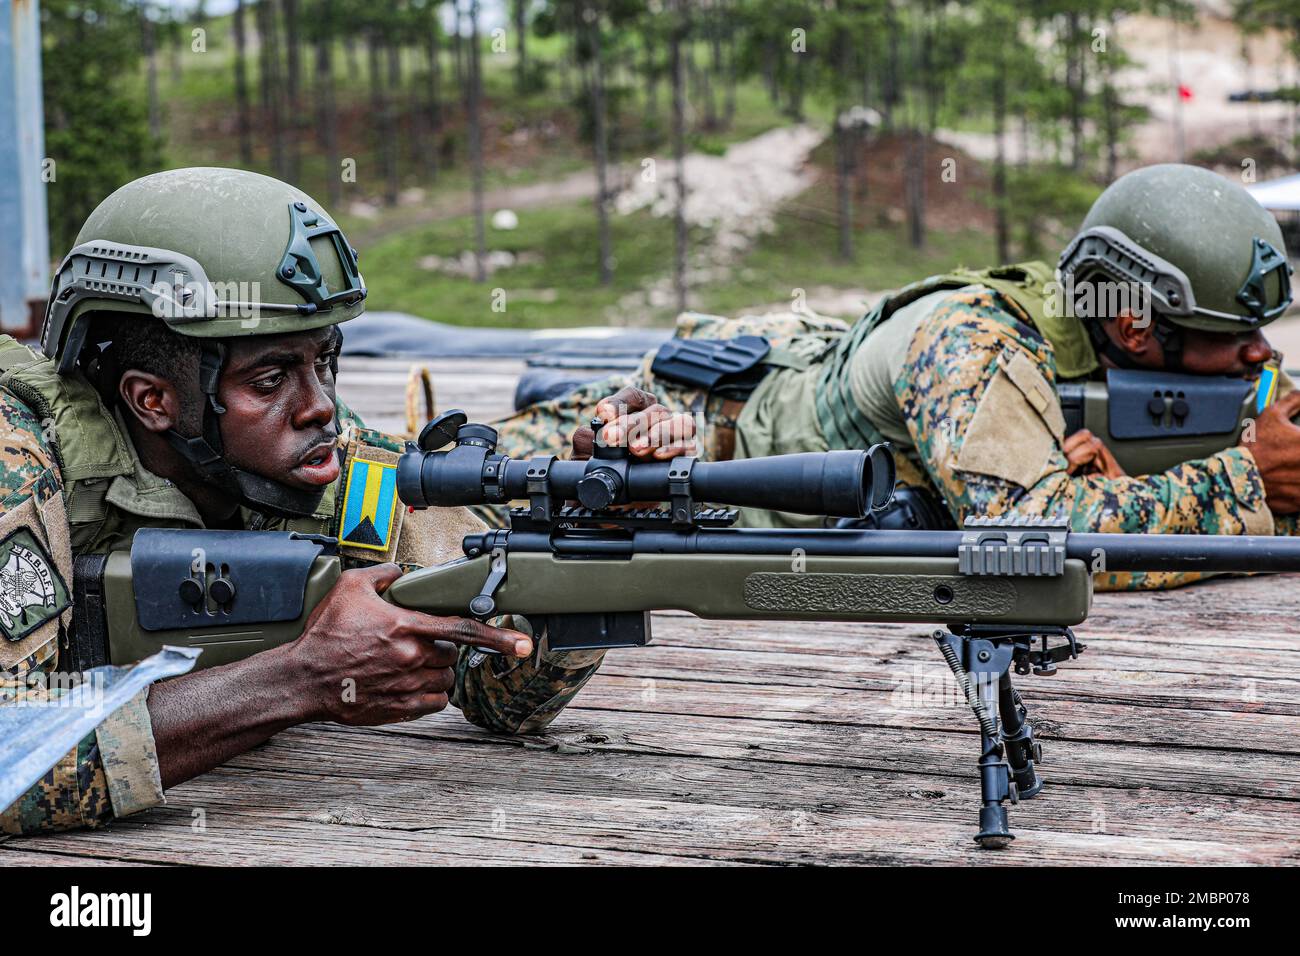 https://c8.alamy.com/comp/2MBP078/the-bahamas-sniper-team-prepare-to-begin-the-combined-assault-course-for-fuerzas-comando-2022-in-la-venta-honduras-on-june-17-2022-the-overall-competition-promotes-military-to-military-relationships-increases-mission-readiness-and-improves-regional-security-2MBP078.jpg